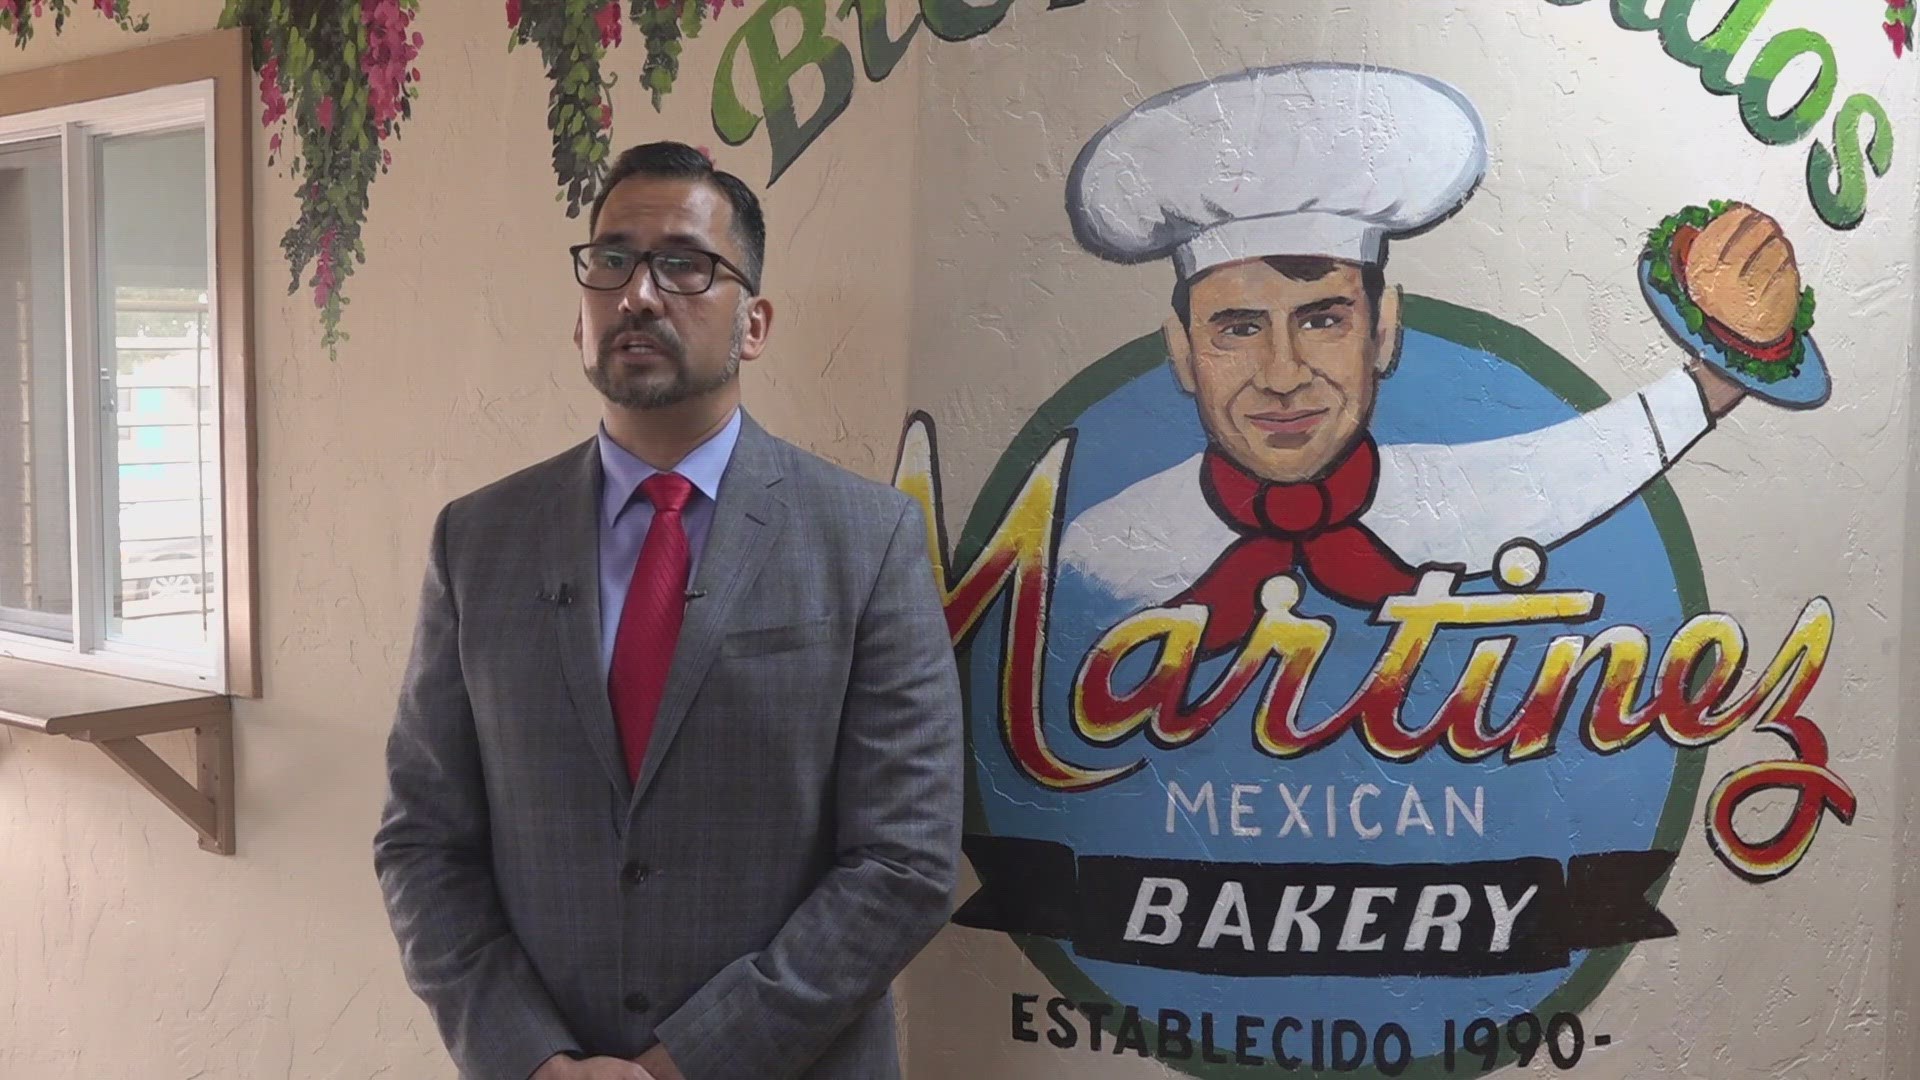 Midland County Commissioner, Luis Sanchez, announced his run for re-election at Martinez Bakery on Tuesday and talked about what is next for Midland.